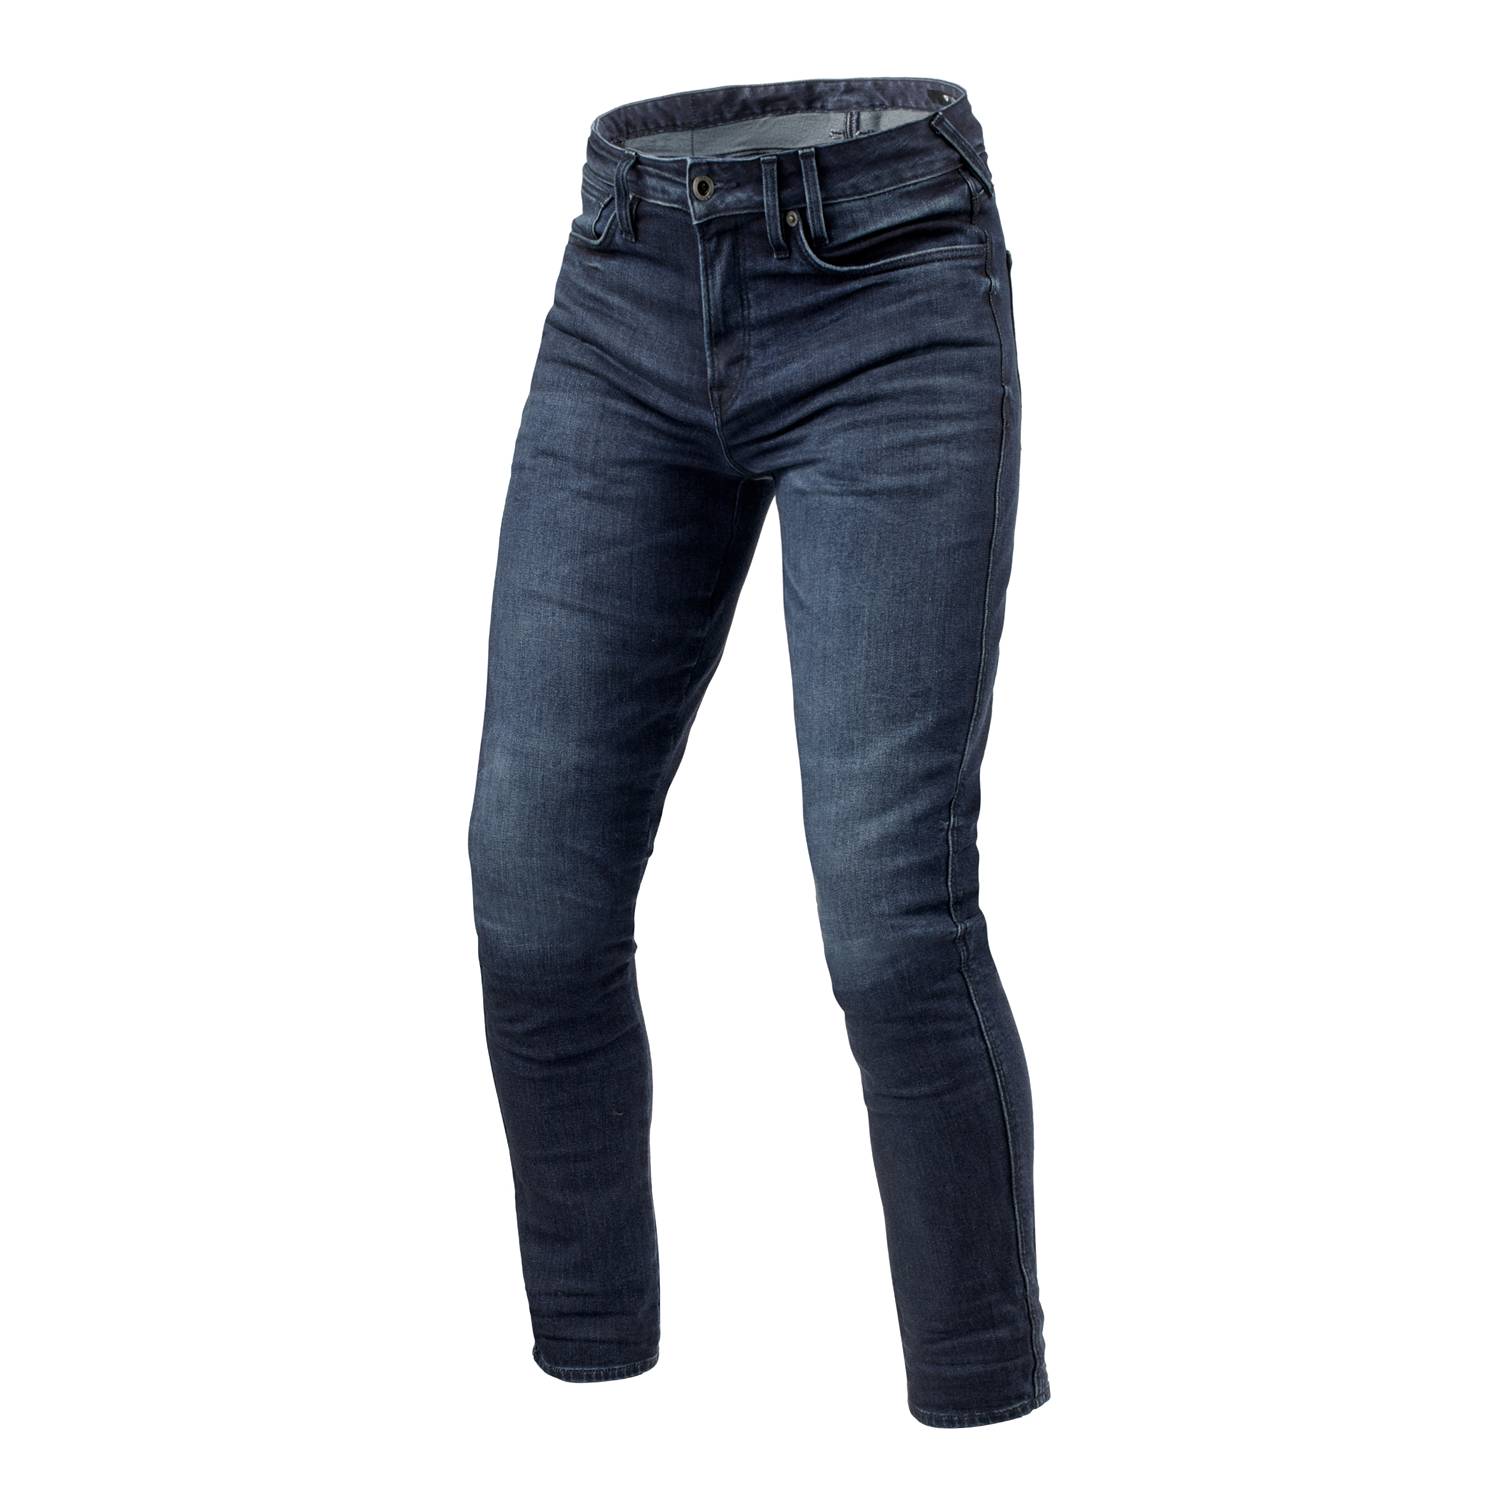 Image of REV'IT! Jeans Carlin SK Dark Blue Used L32 Motorcycle Jeans Taille L32/W32